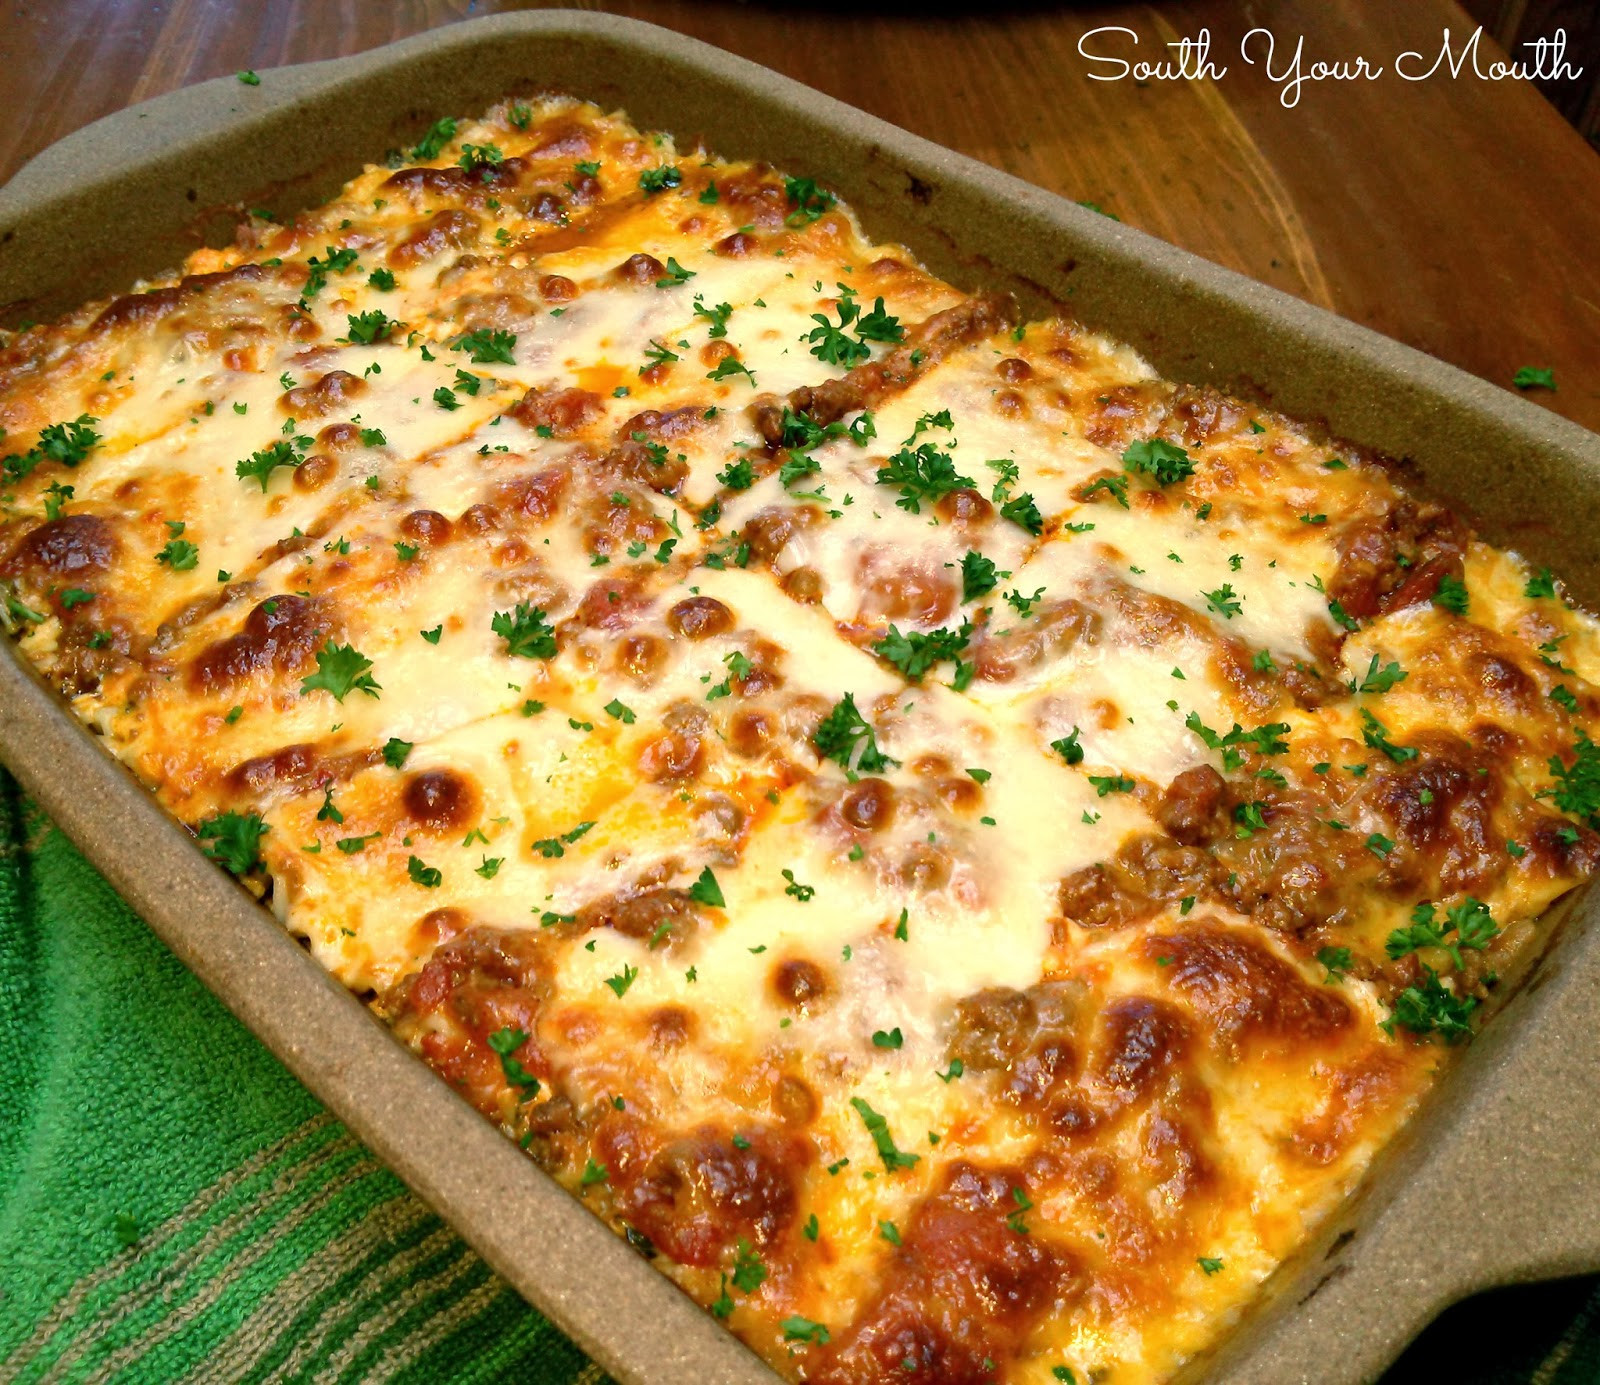 Cheese Lasagna Recipe
 South Your Mouth Classic Lasagna